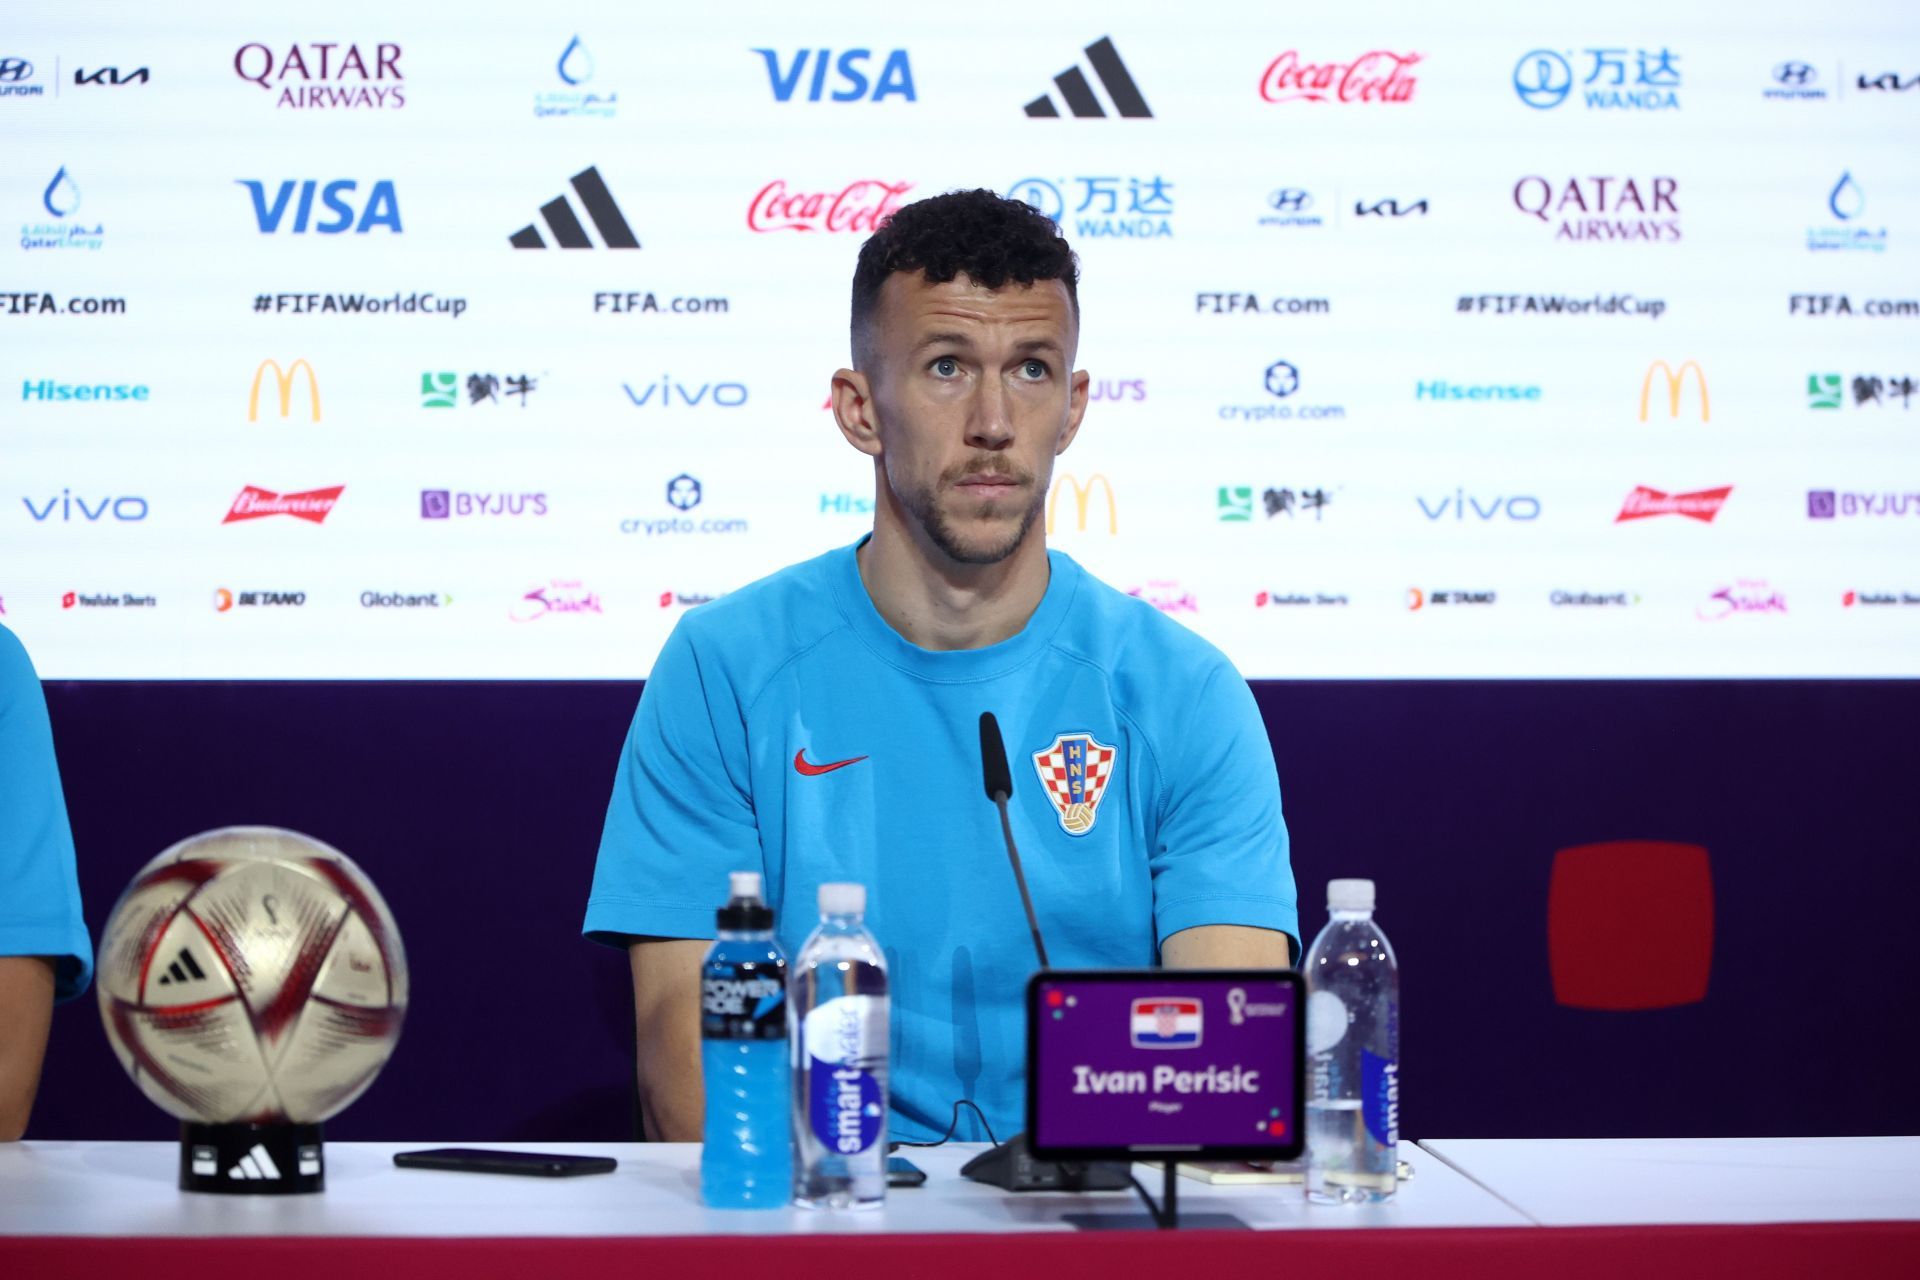 Ivan Perisic has shown great determination as he was named in the starting lineup just days after the World Cup.